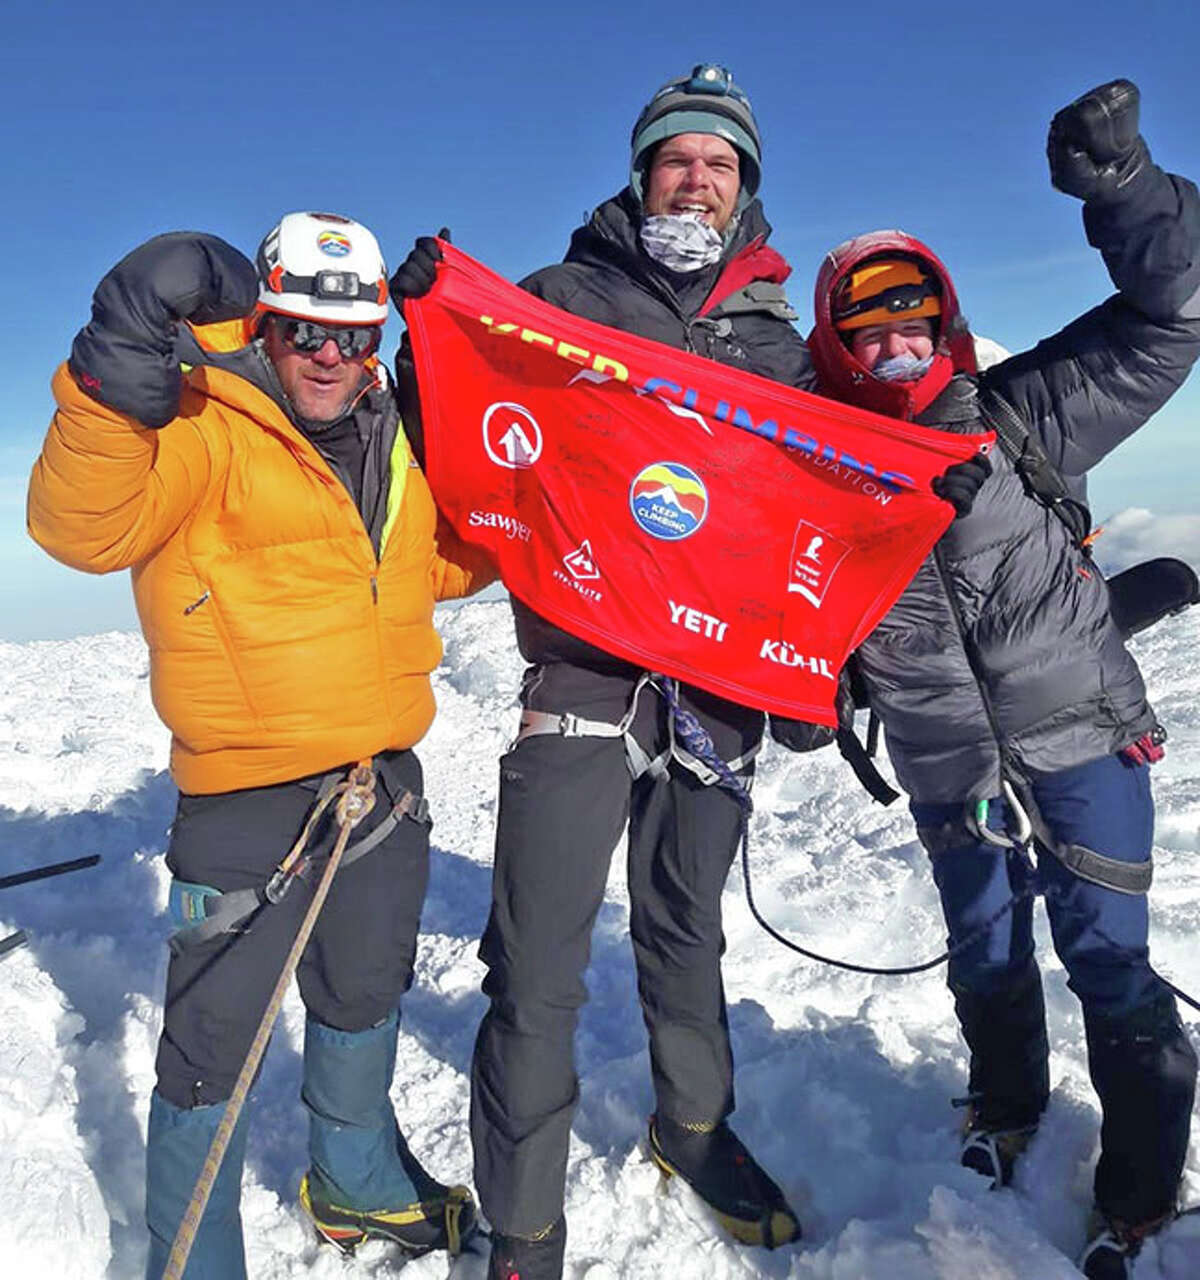 Edwardsville resident Lance McOlgan, left, Keith Austin, middle, and Brittany Oligney celebrate after reaching the summit of Chimborazo, the highest mountain in Ecuador, on Aug. 19 during the eighth annual Climb for the Kids, hosted by the Keep Climbing Foundation. Seven climbers were in their party. but they were the only ones to reach the top of the mountain.